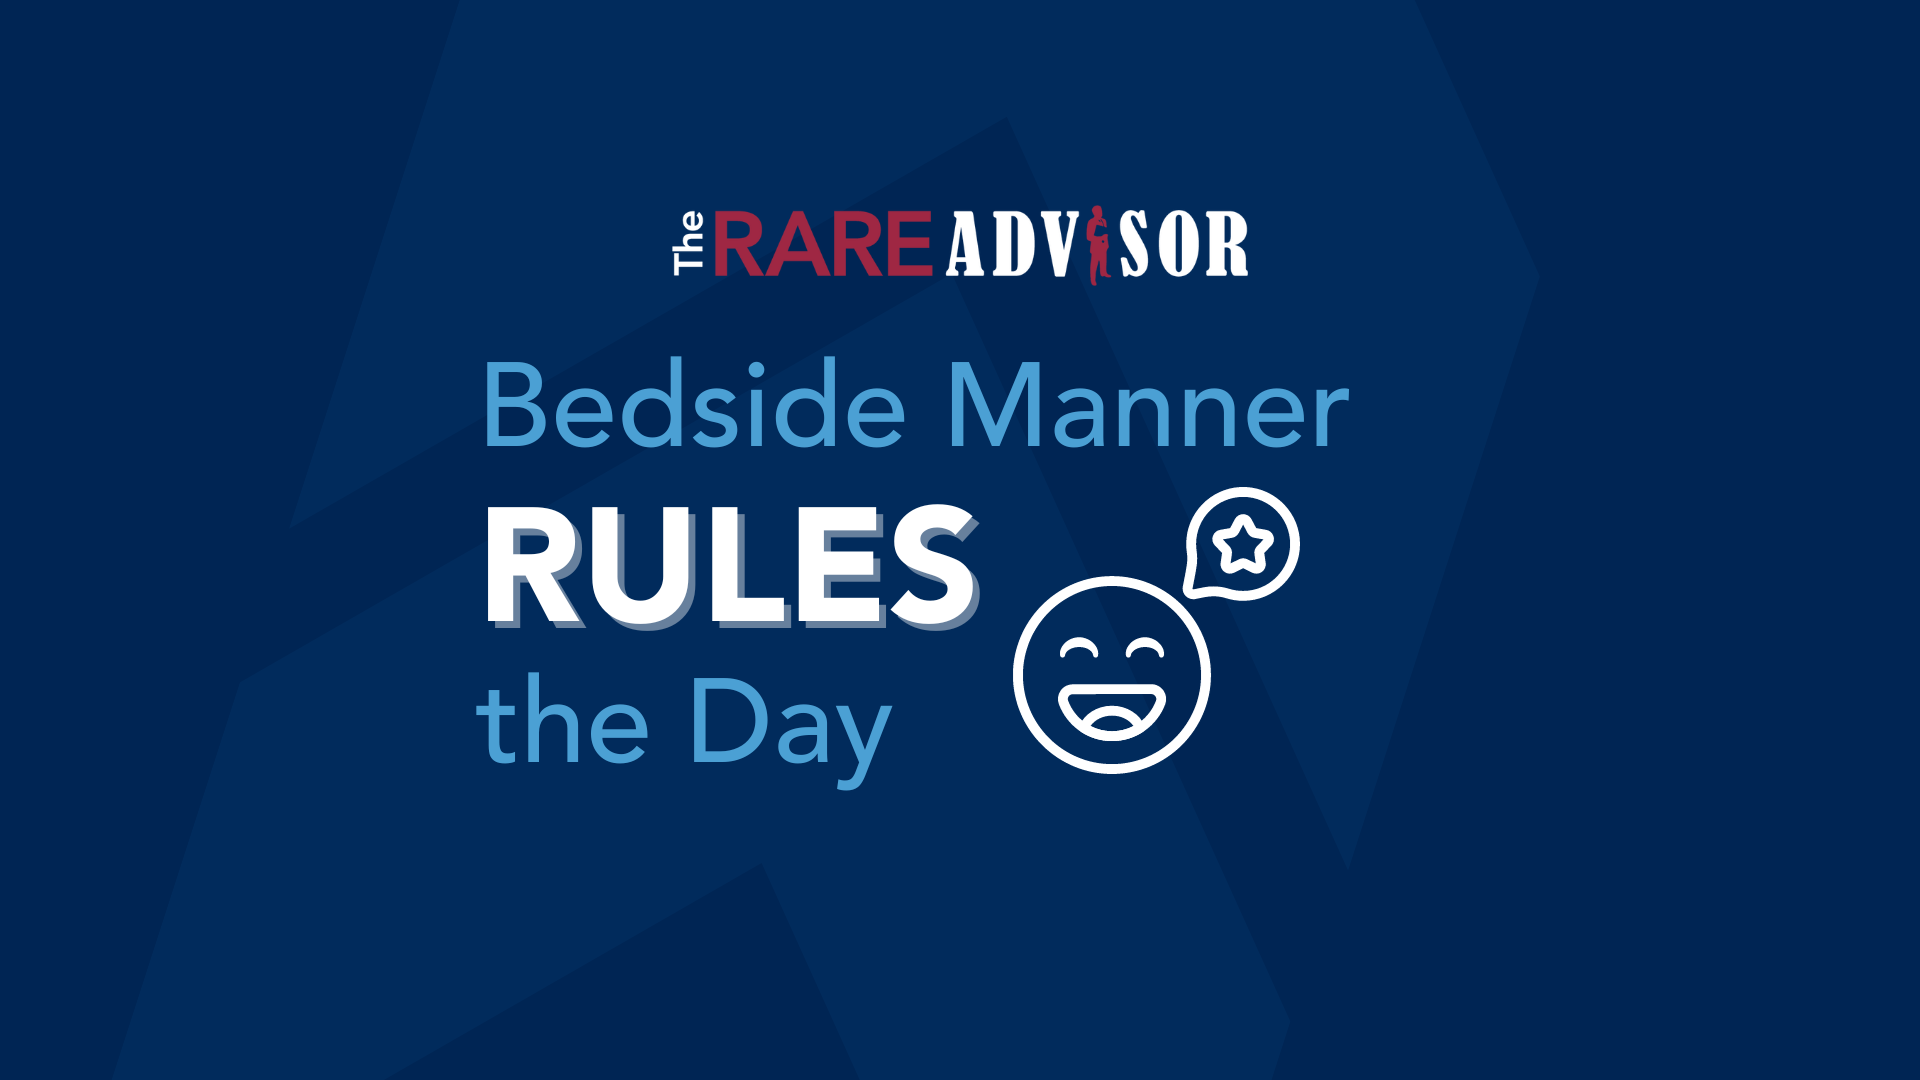 The RARE Advisor: Bedside Manner Rules the Day